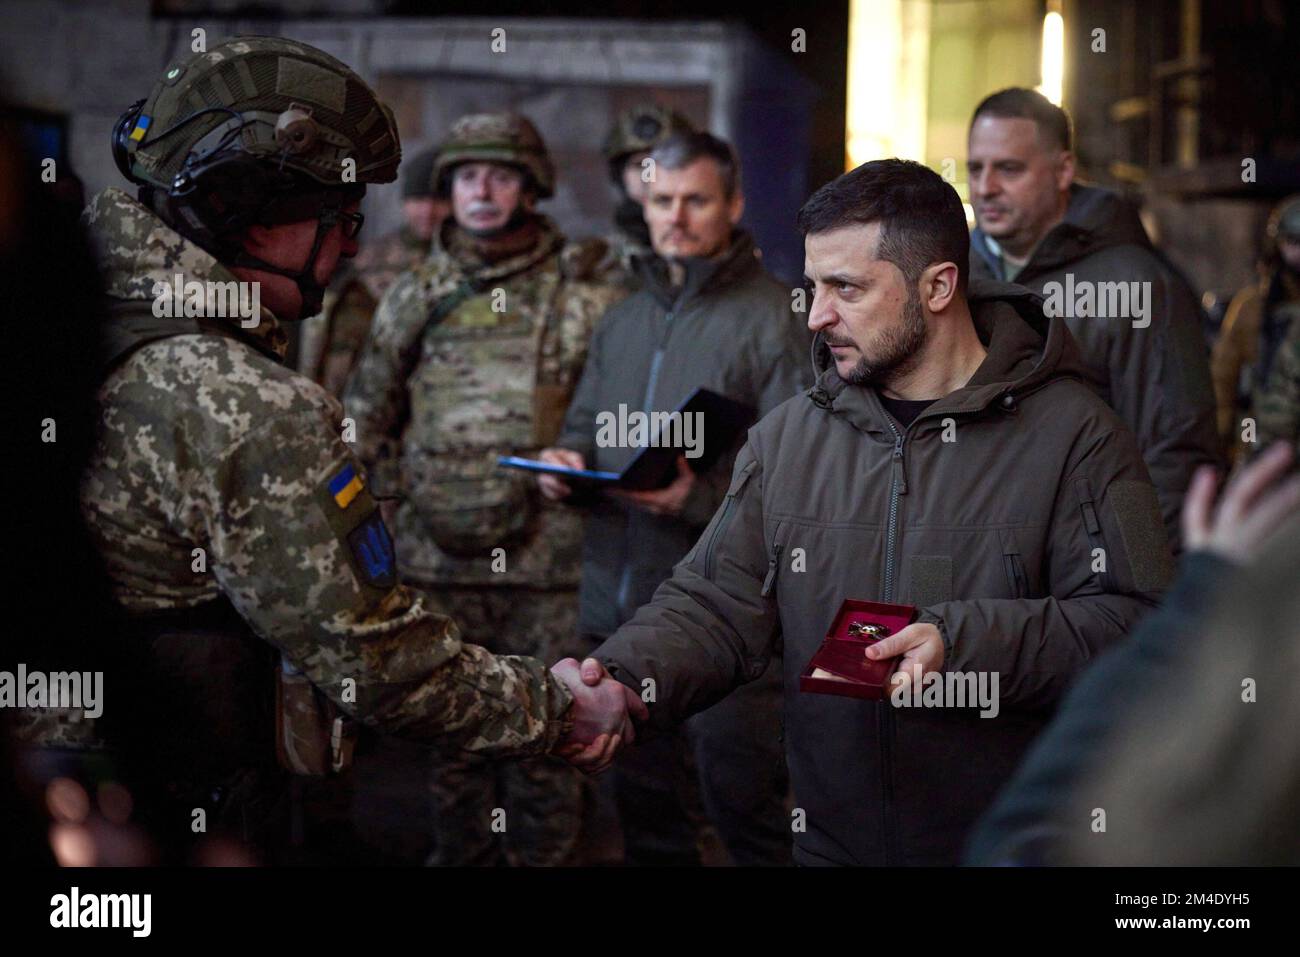 Bakhmut, Donetsk Oblast, Ukraine. 20th Dec, 2022. Ukrainian President VOLODYMYR ZELENSKY thanks soldiers before presenting medals for heroism to frontline troops during a visit to the defensive lines in Bakhmut. Zelensky met Tuesday with troops in the besieged eastern city of Bakhmut. The city in eastern Ukraine has been at the center of months of fighting between Russian and Ukrainian forces. (Credit Image: © Ukraine Presidency/ZUMA Press Wire) Stock Photo